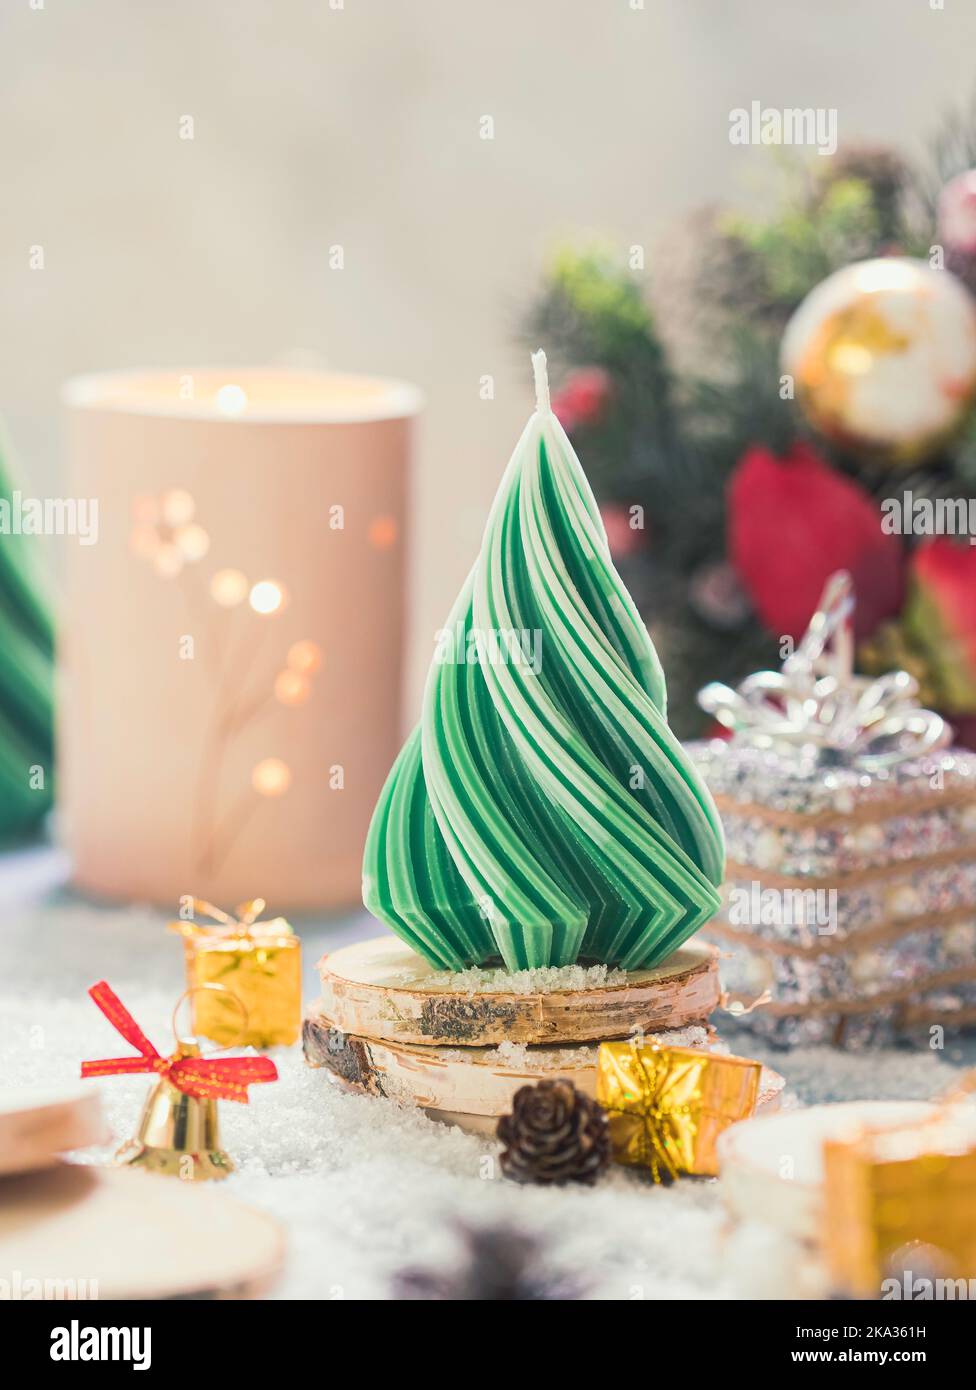 Christmas Candle. New Year's composition with candle in the shape of a Christmas tree. Candles made of natural wax. Copy space Stock Photo